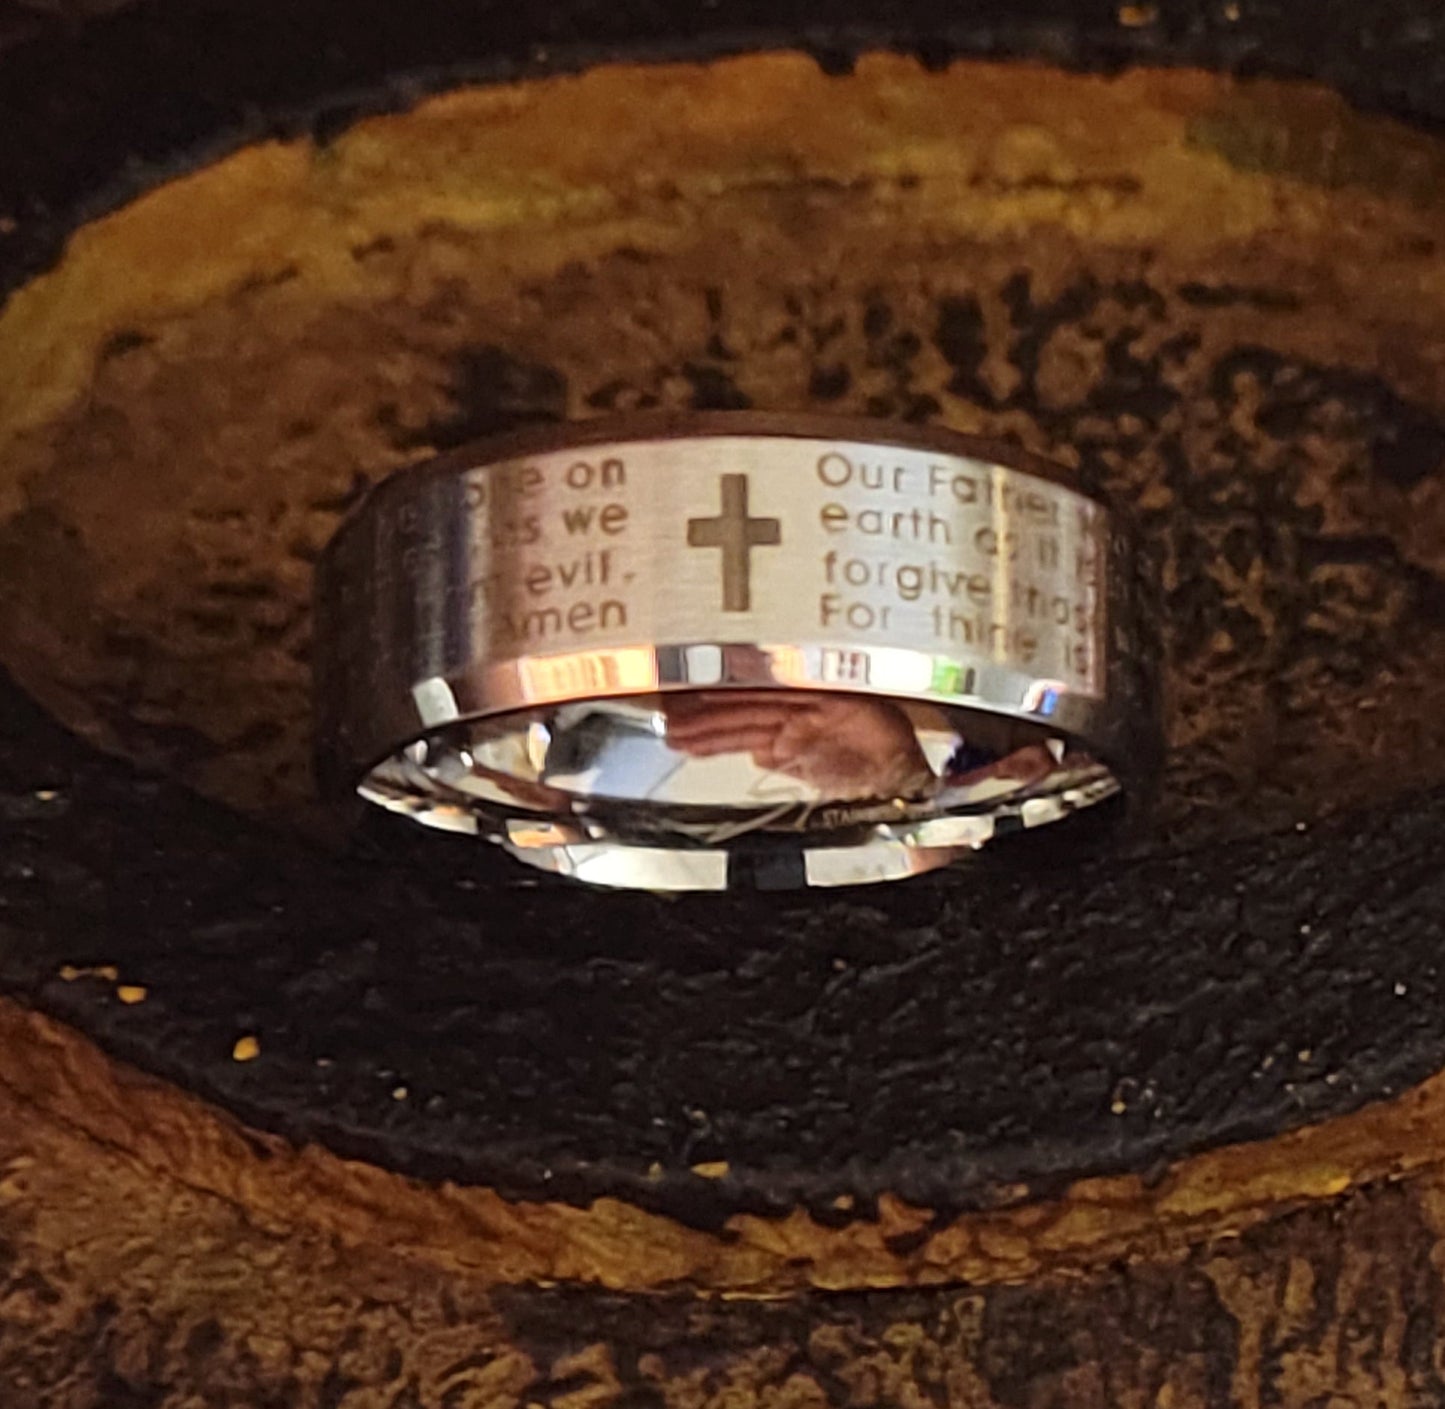 Think Engraved Engraved Ring Personalized The Lord's Prayer Purity Ring Christian Cross Prayer Ring